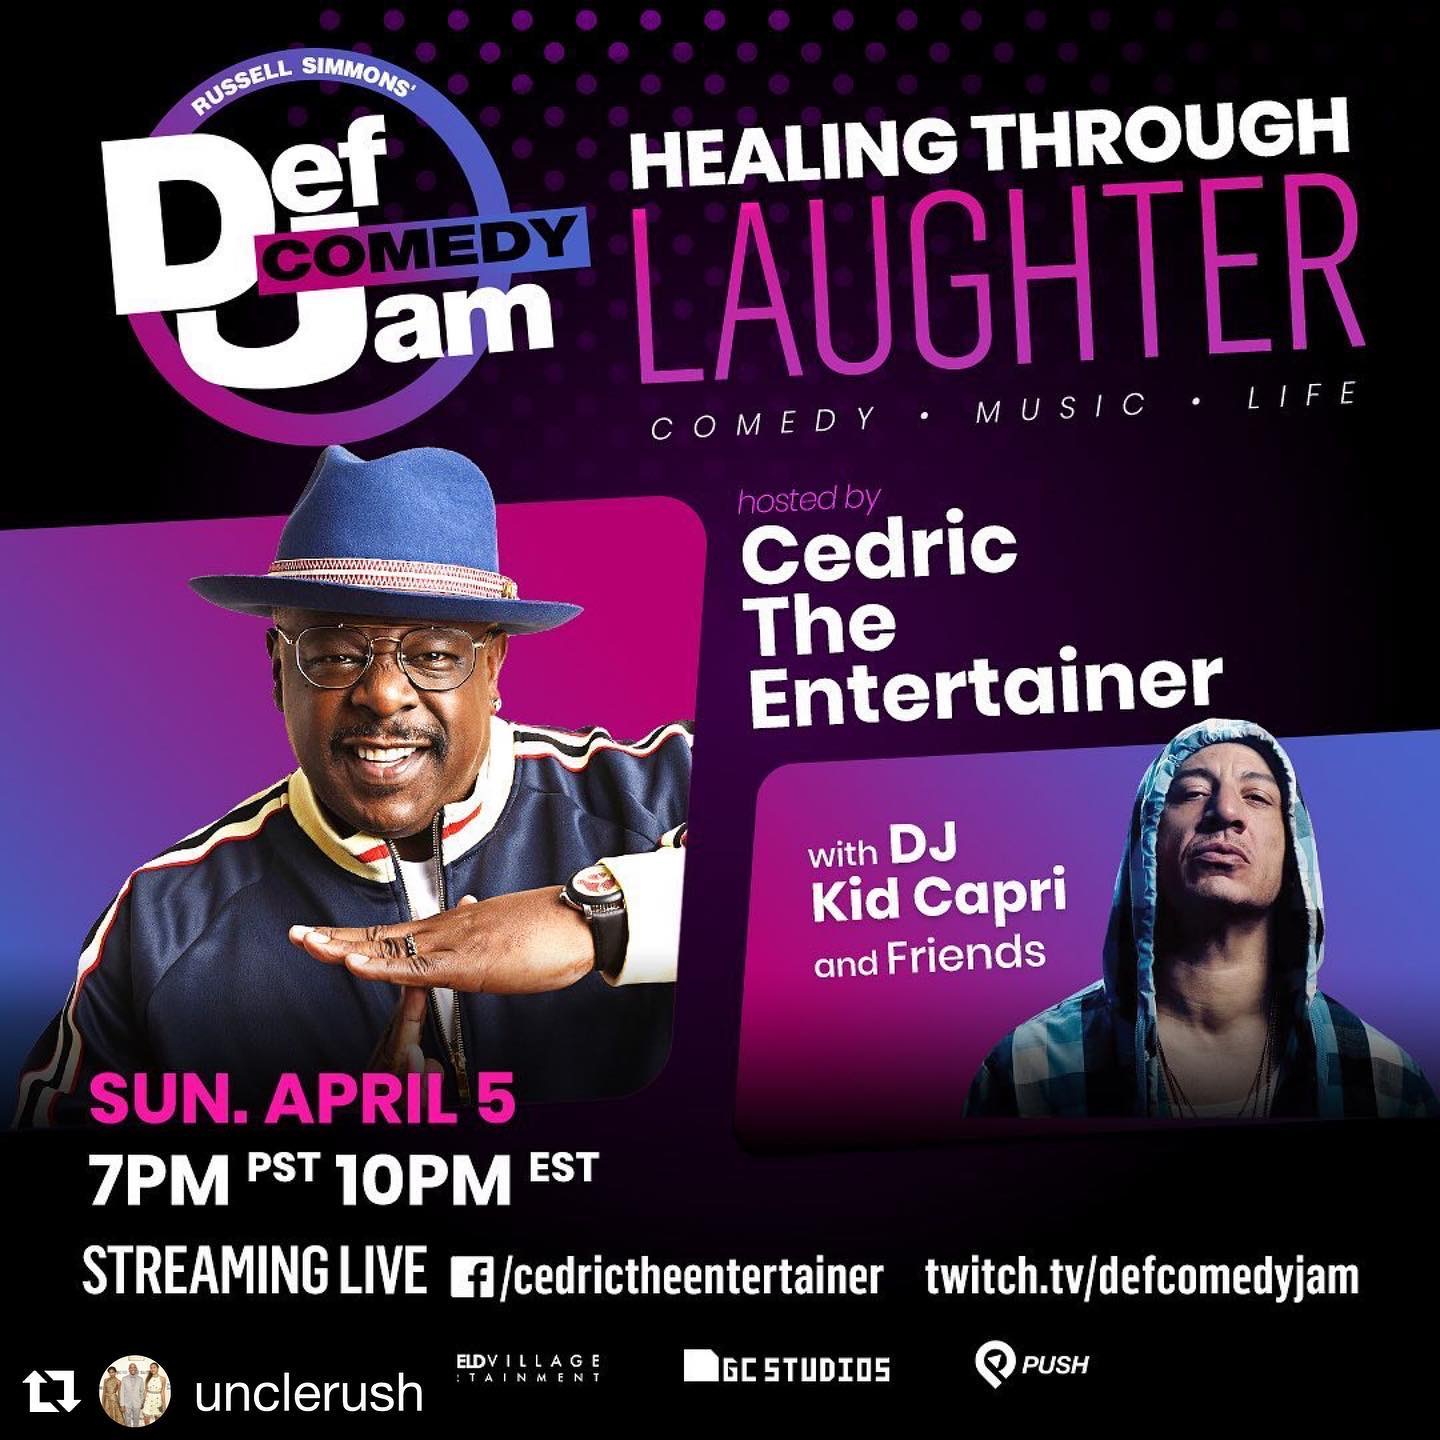 DEF COMEDY JAM WITH US TONIGHT